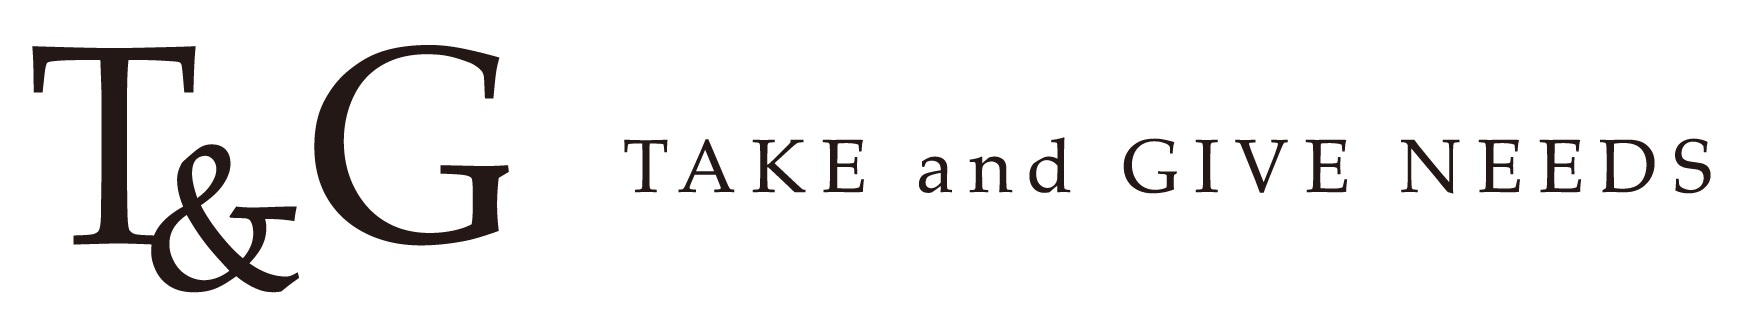 TAKE AND GIVE. NEEDS Co., Ltd.